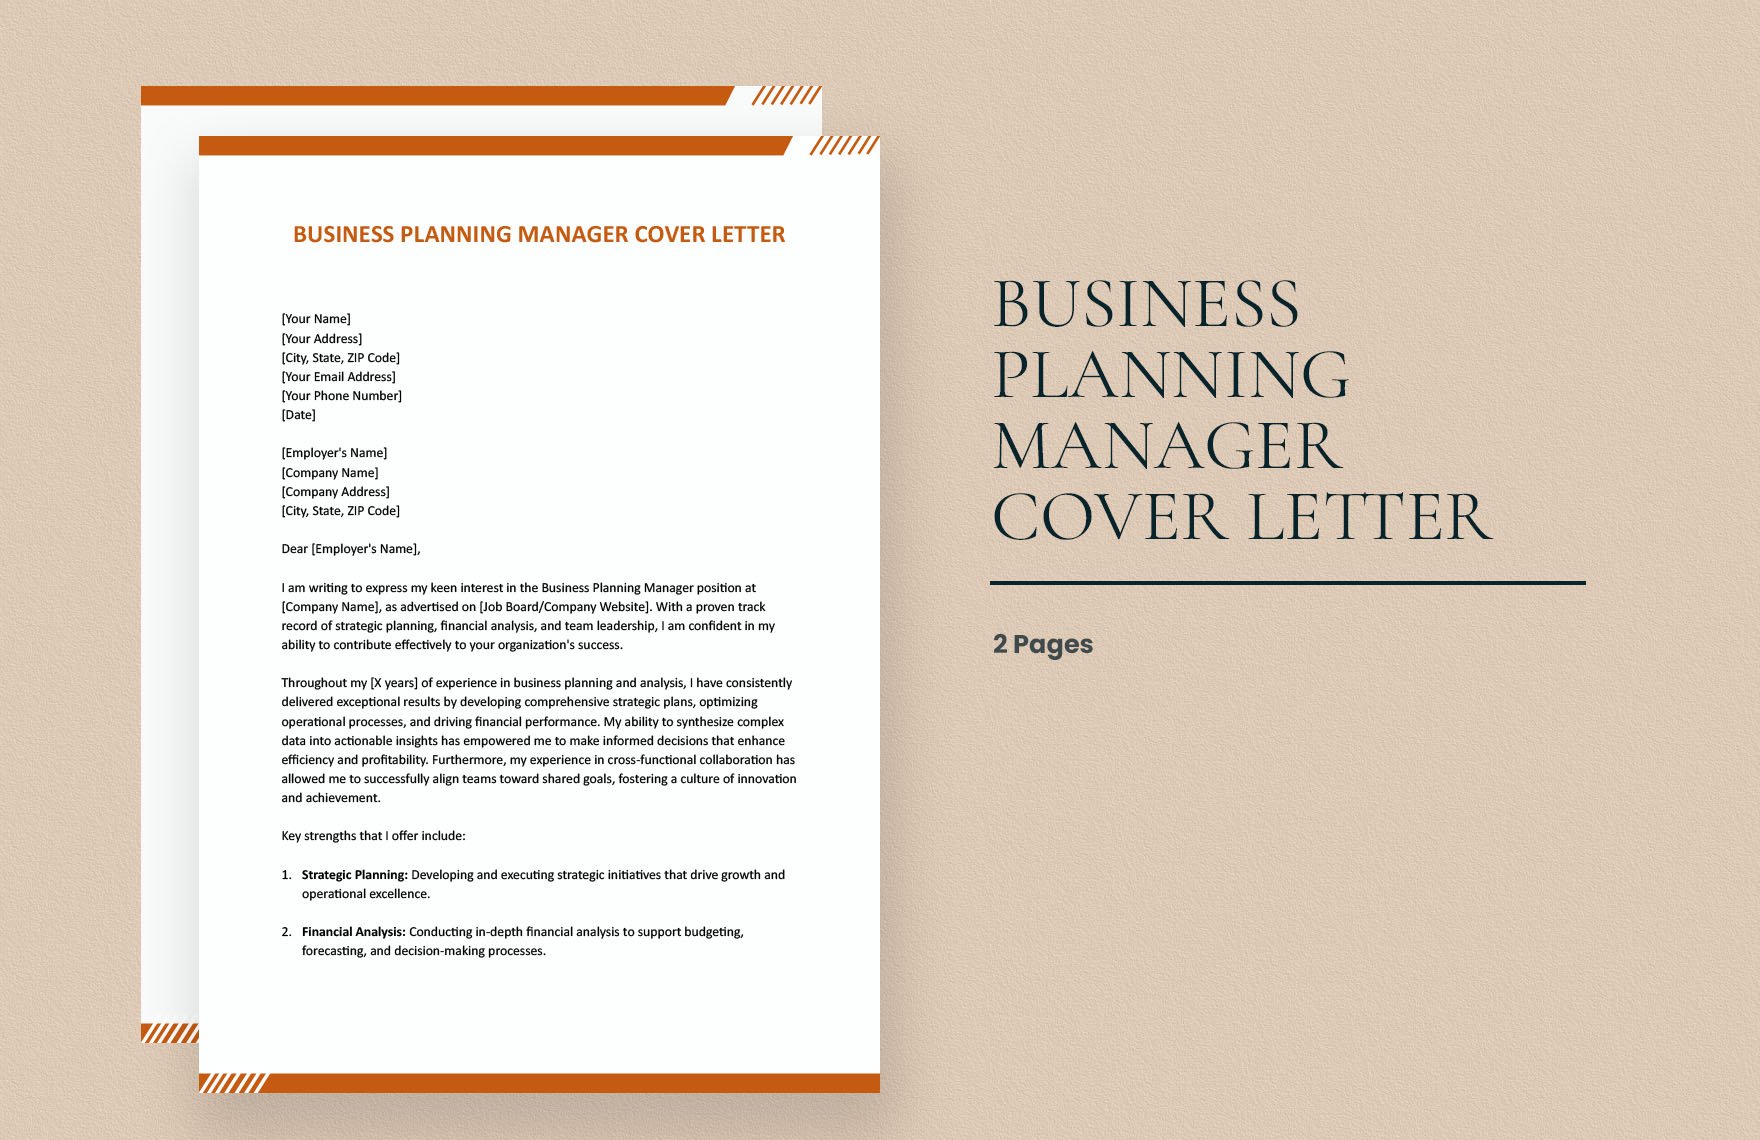 Business Planning Manager Cover Letter